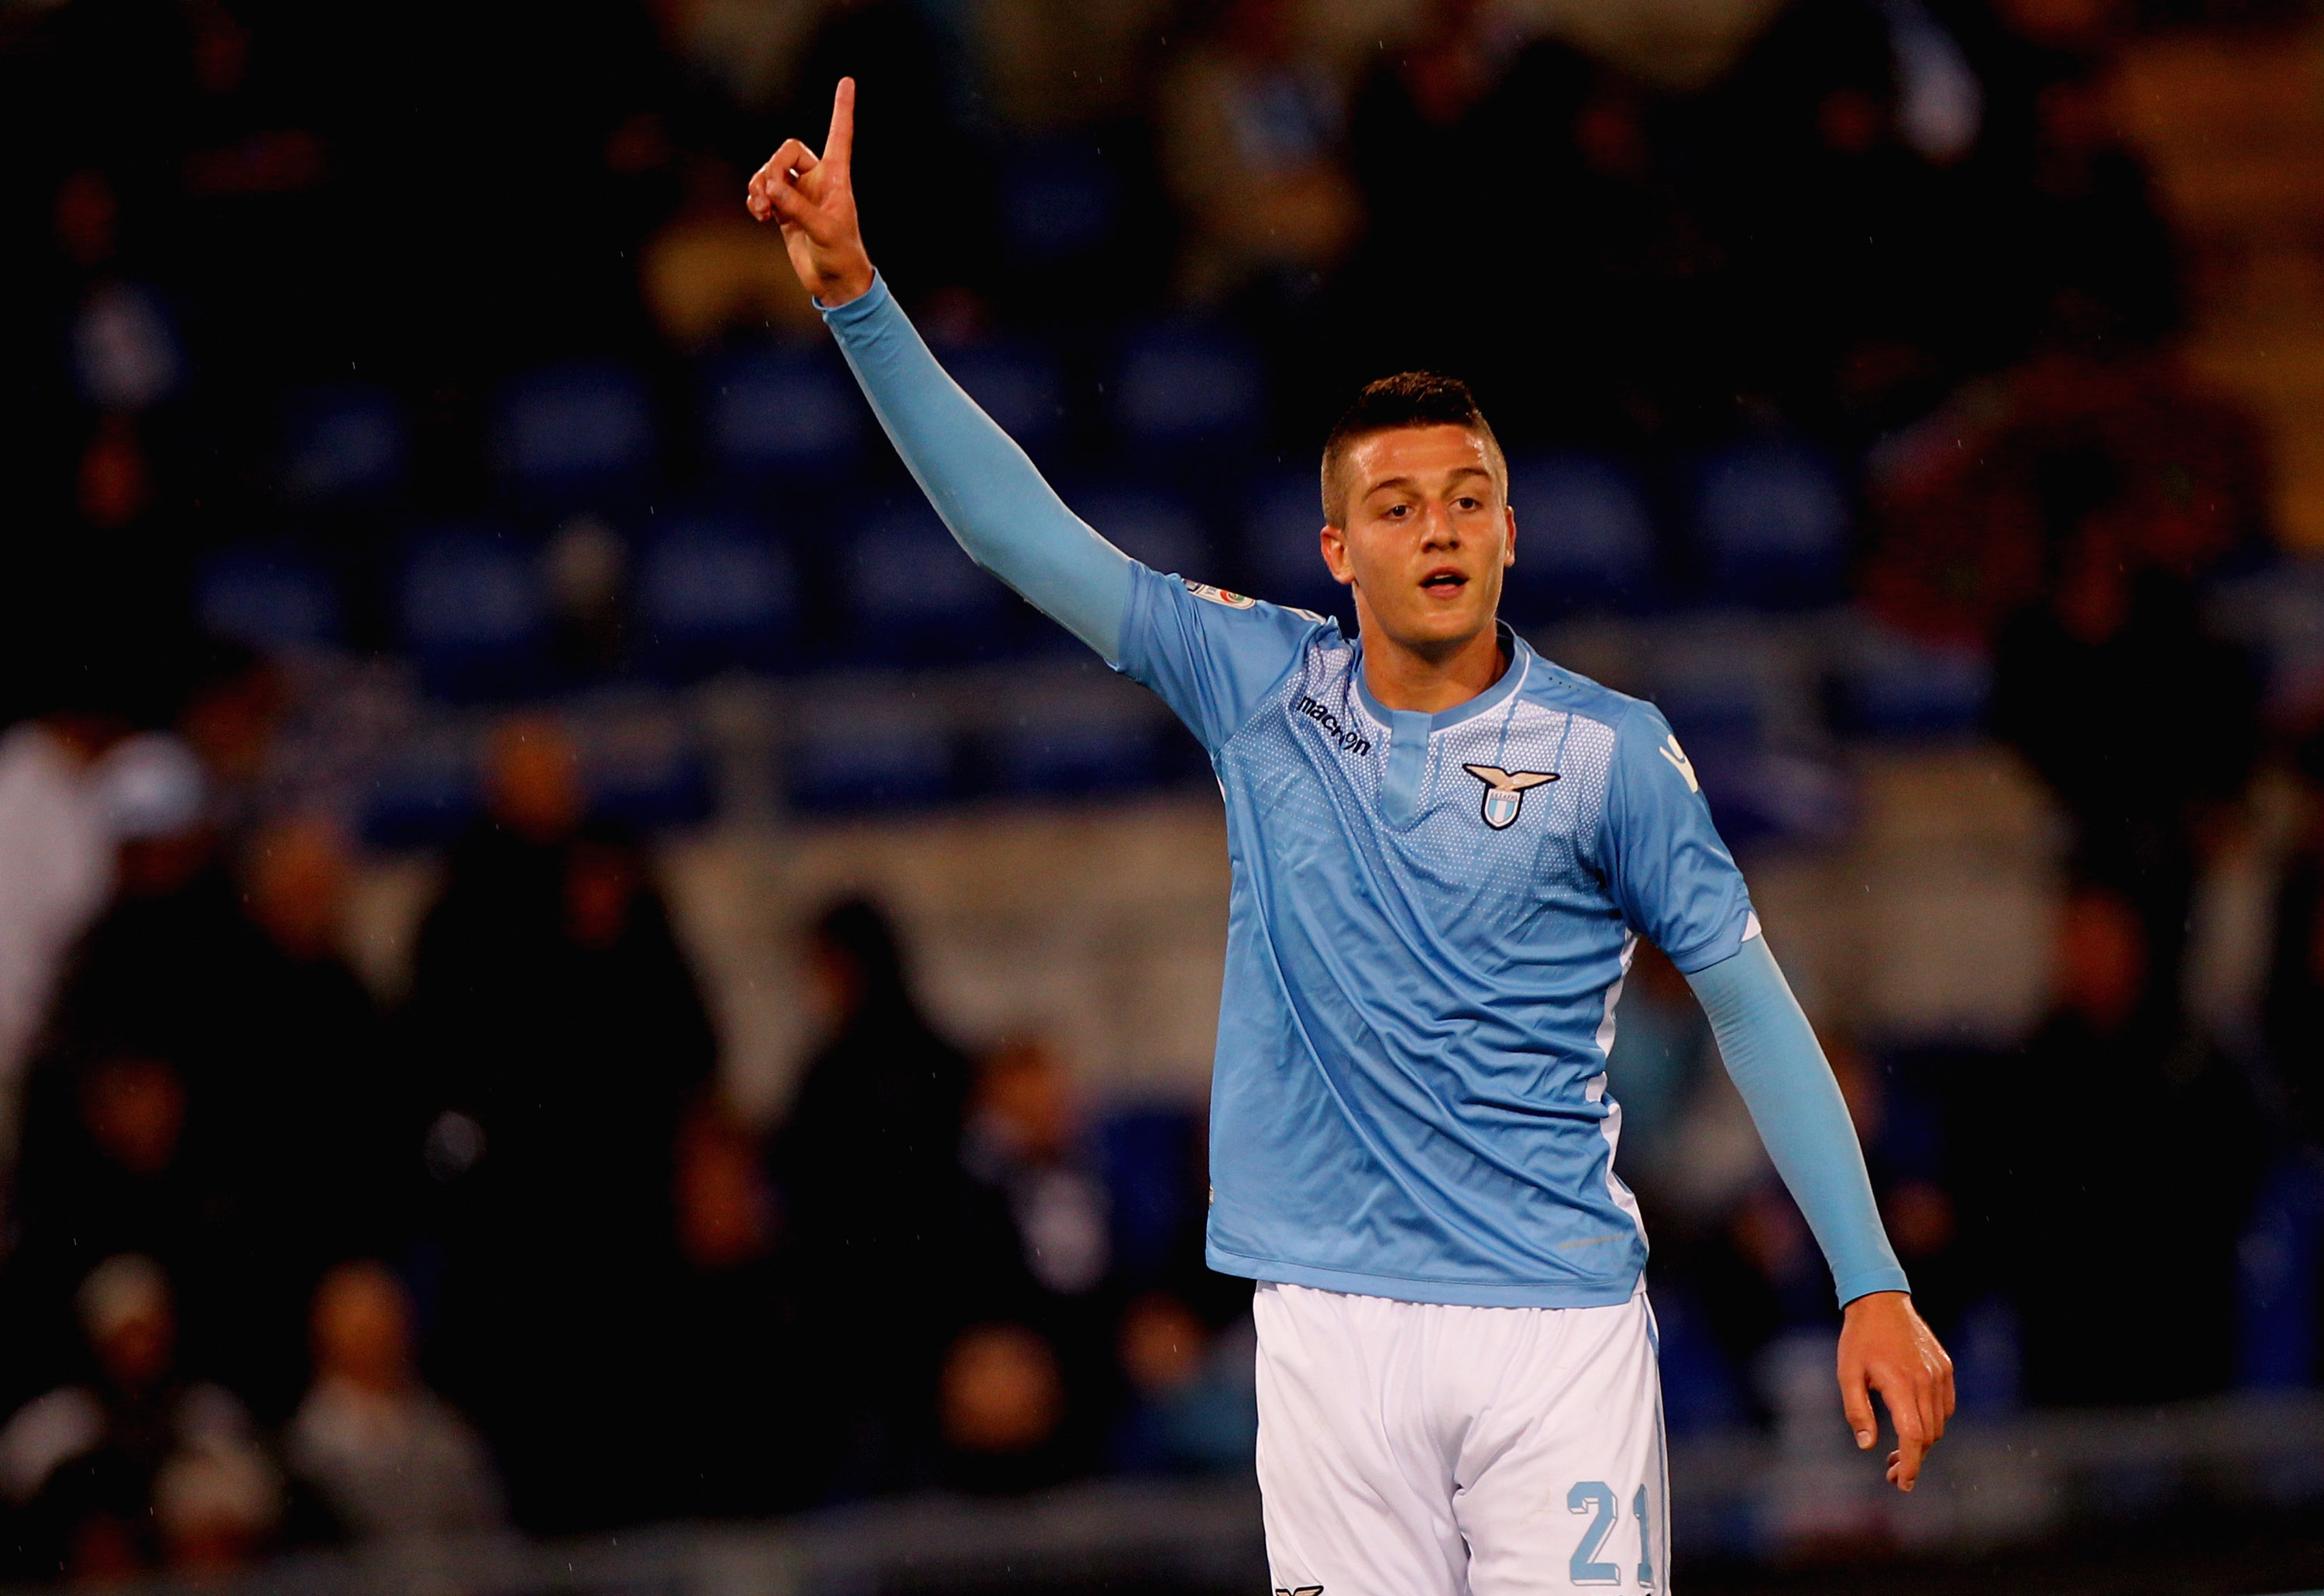 ROME, ITALY - SEPTEMBER 23:  Sergej Milinkovic-Savic of SS Lazio reacts during the Serie A match between SS Lazio and Genoa CFC at Stadio Olimpico on September 23, 2015 in Rome, Italy.  (Photo by Paolo Bruno/Getty Images)